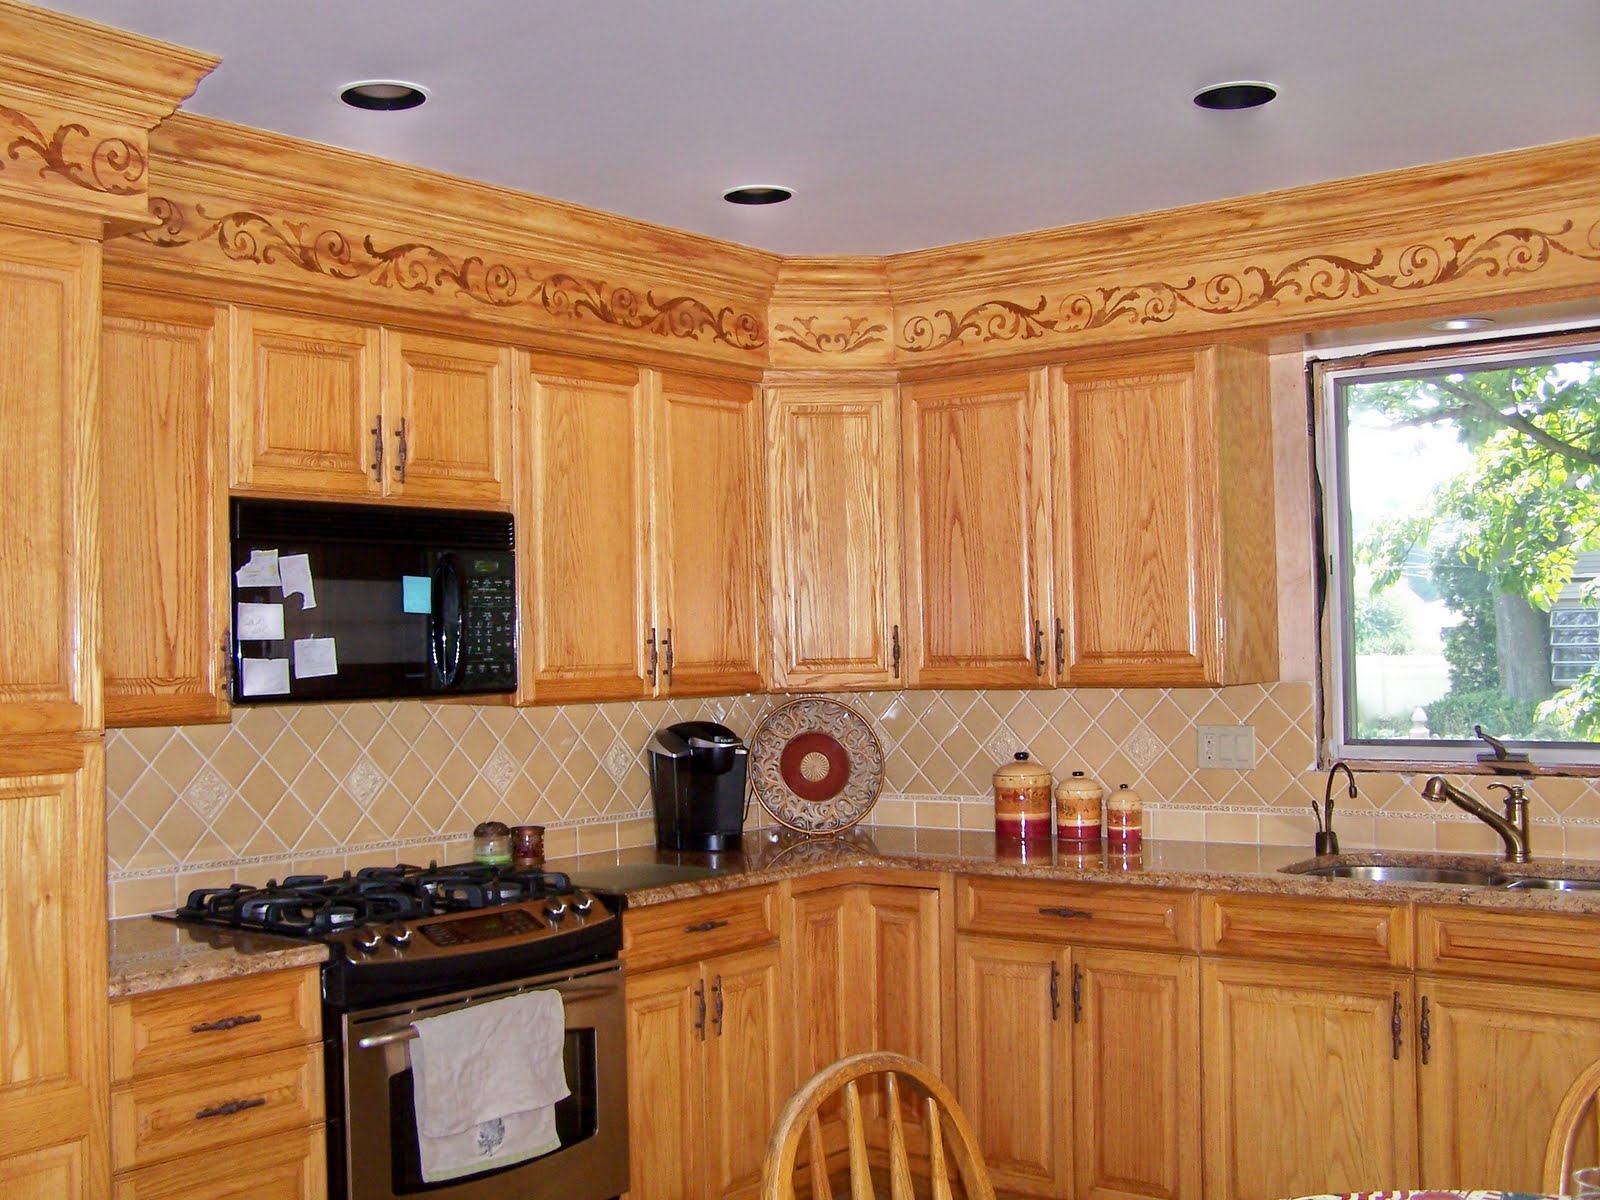 Kitchen Color Ideas With Oak Cabinets